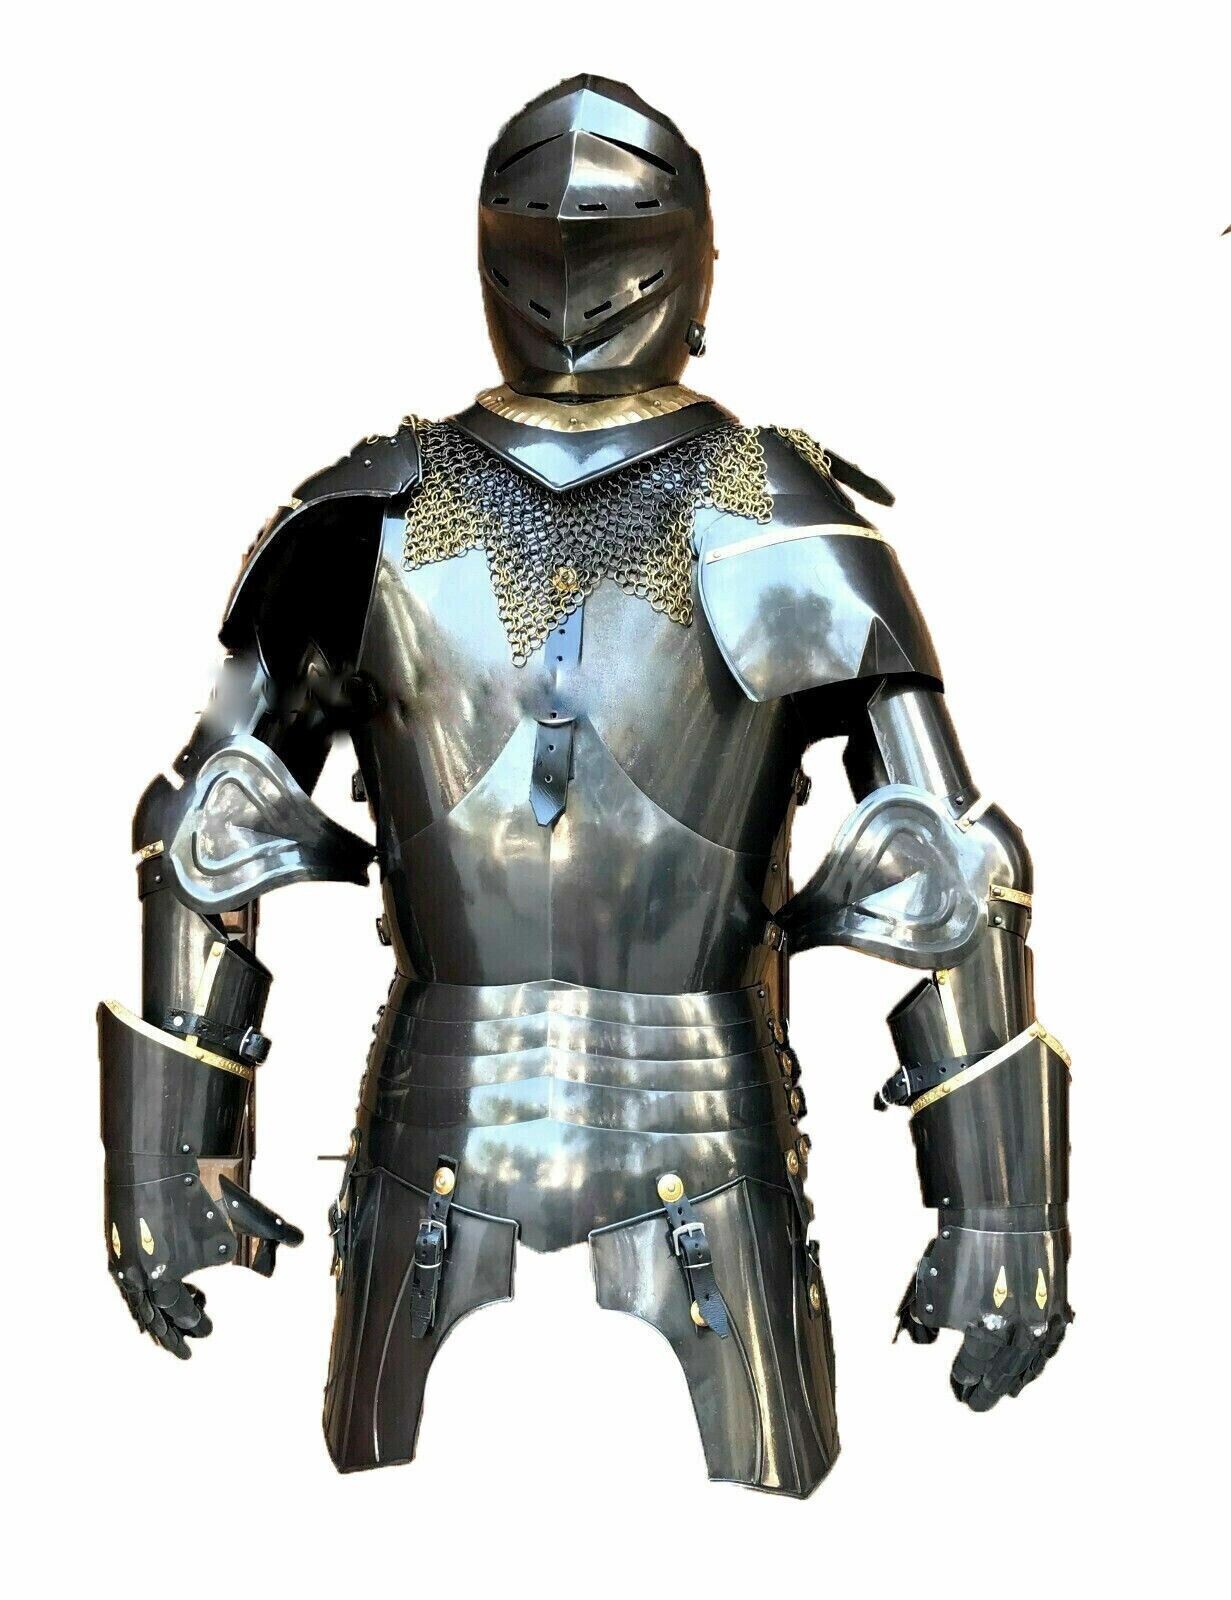 Medieval Times Knight Suit Of Armor Costume Wearable X-Mas Costume New Handmade